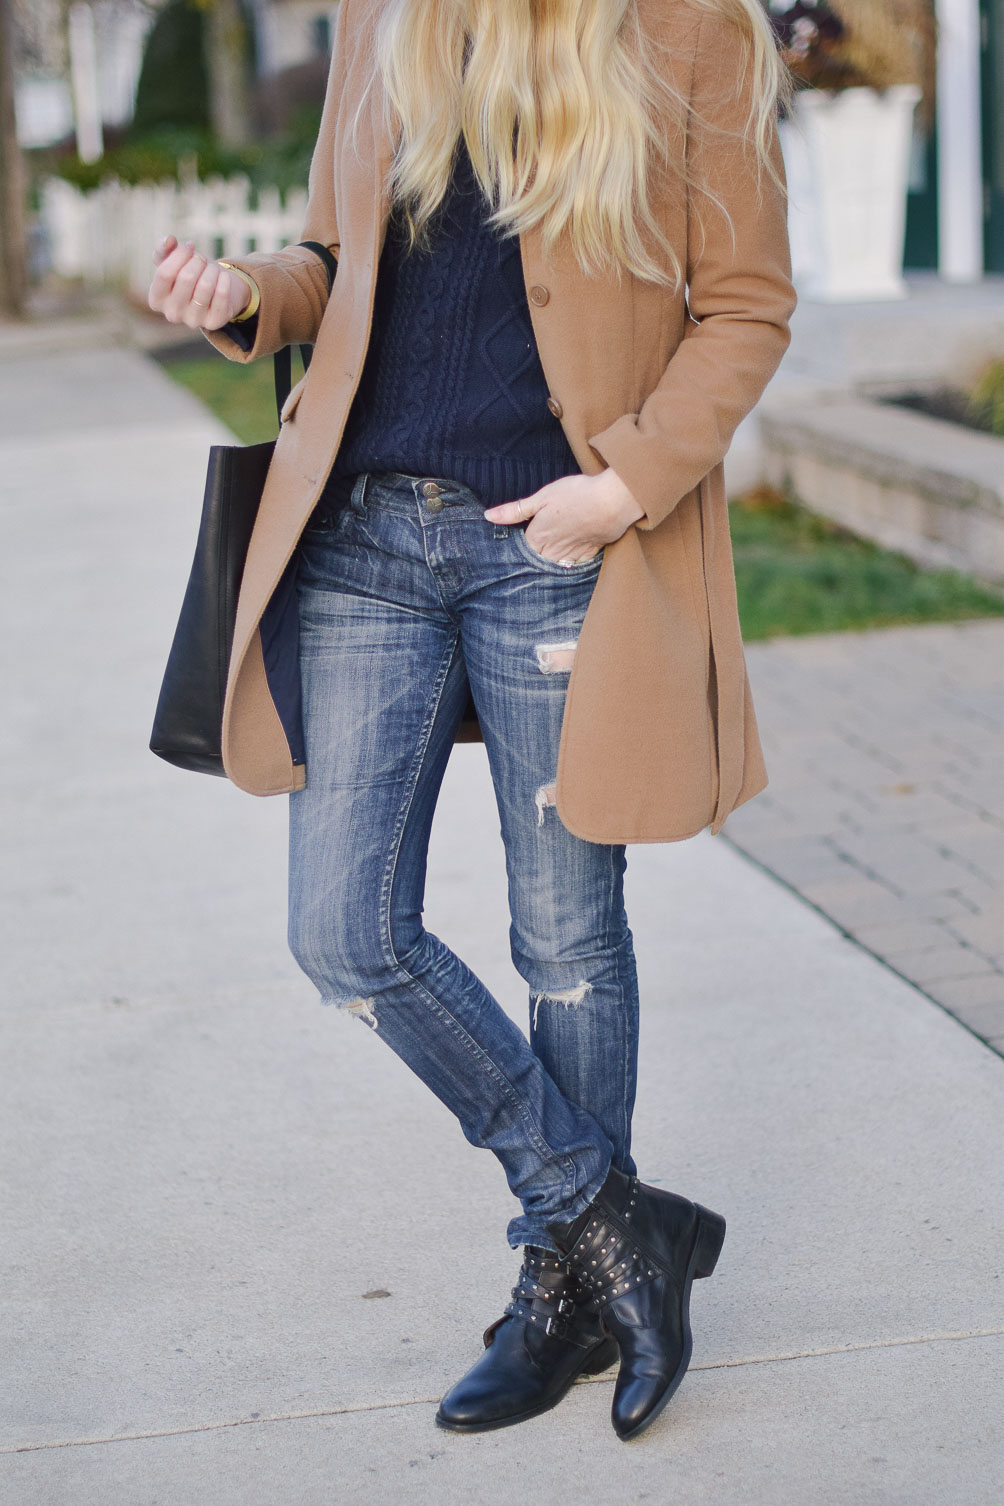 styling a camel winter coat with felt fedora, cable knit sweater, distressed boyfriend jeans and buckle boots